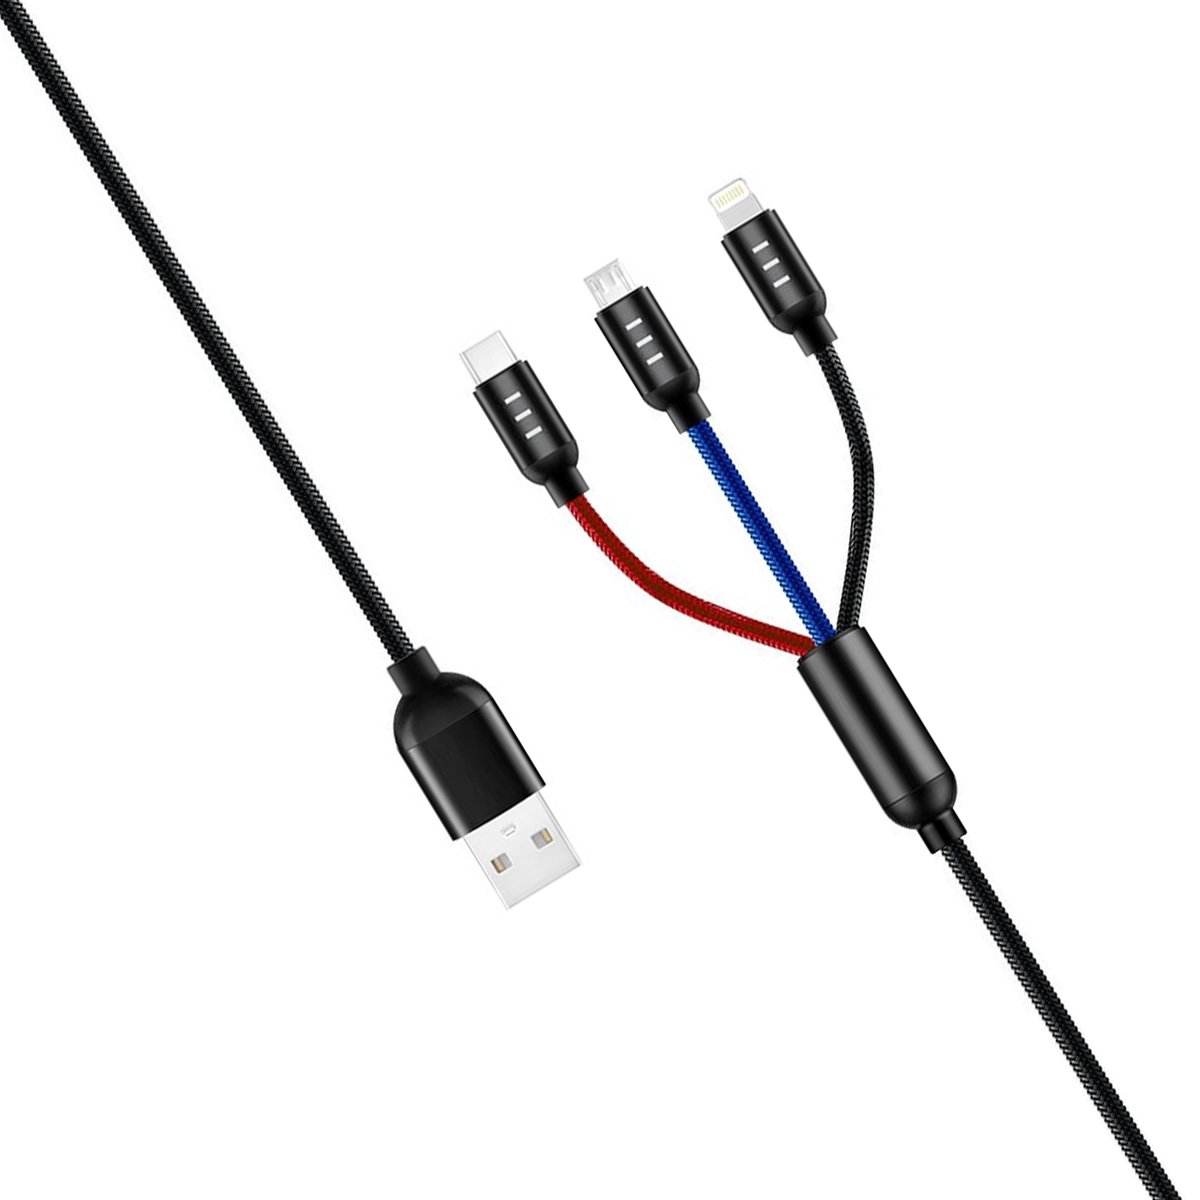 Trands Multi Colored 3 In 1 USB Cable With Lightning Micro USB Type C Connectors 1.2 Meter CA8816